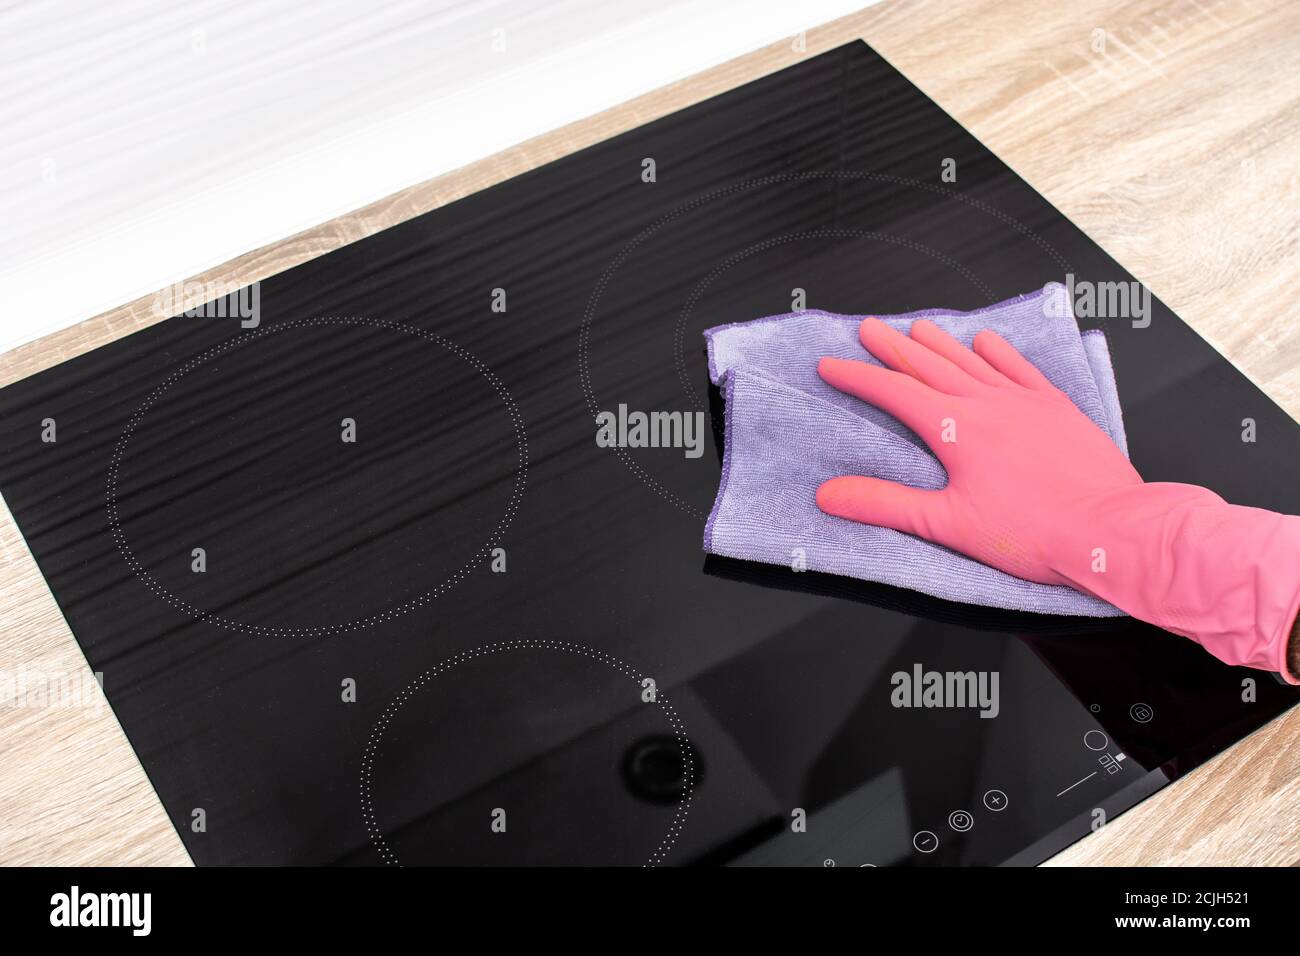 Cleaning a black electric induction cooktop Stock Photo